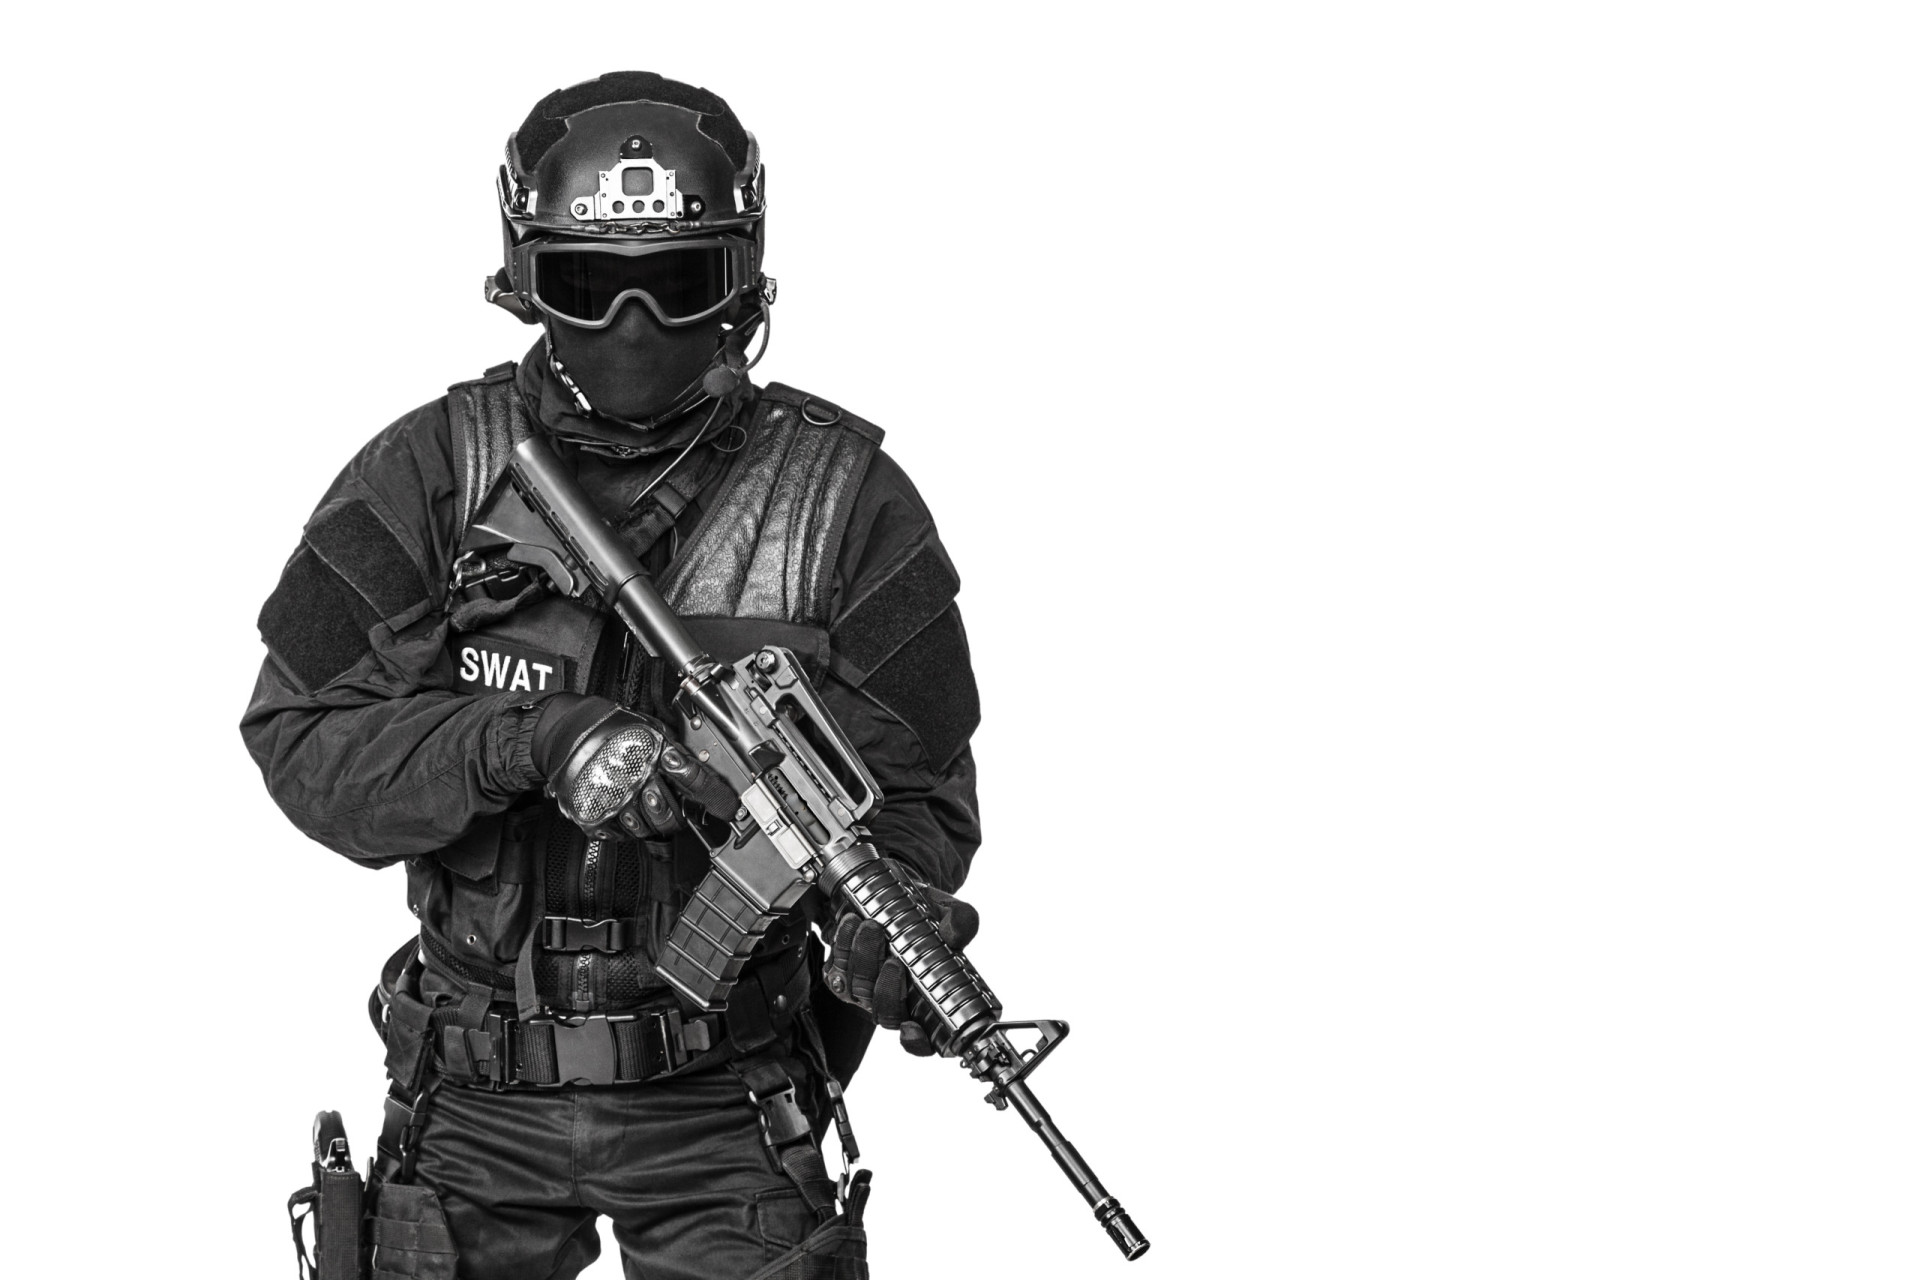 <p>In the US, a SWAT team is a police tactical unit that uses specialized or military equipment and tactics. The acronym stands for "Special Weapons and Tactics."</p>